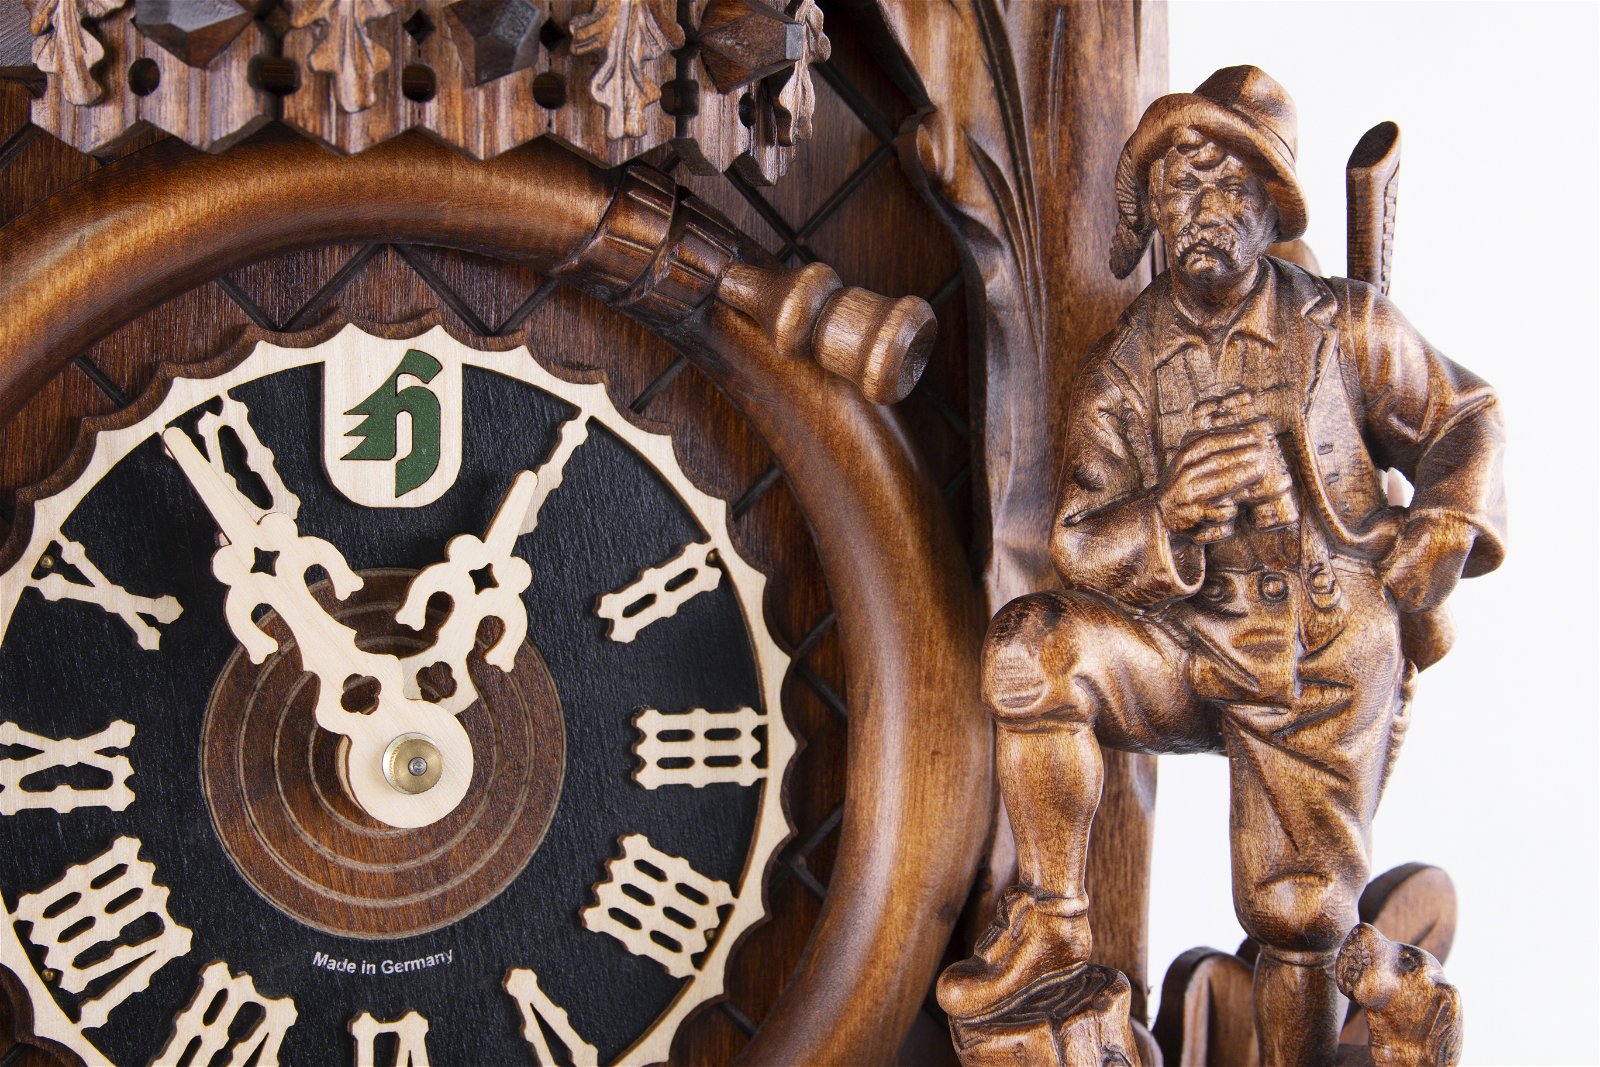 Cuckoo Clock Carved Style 8 Day Movement 72cm by Hönes